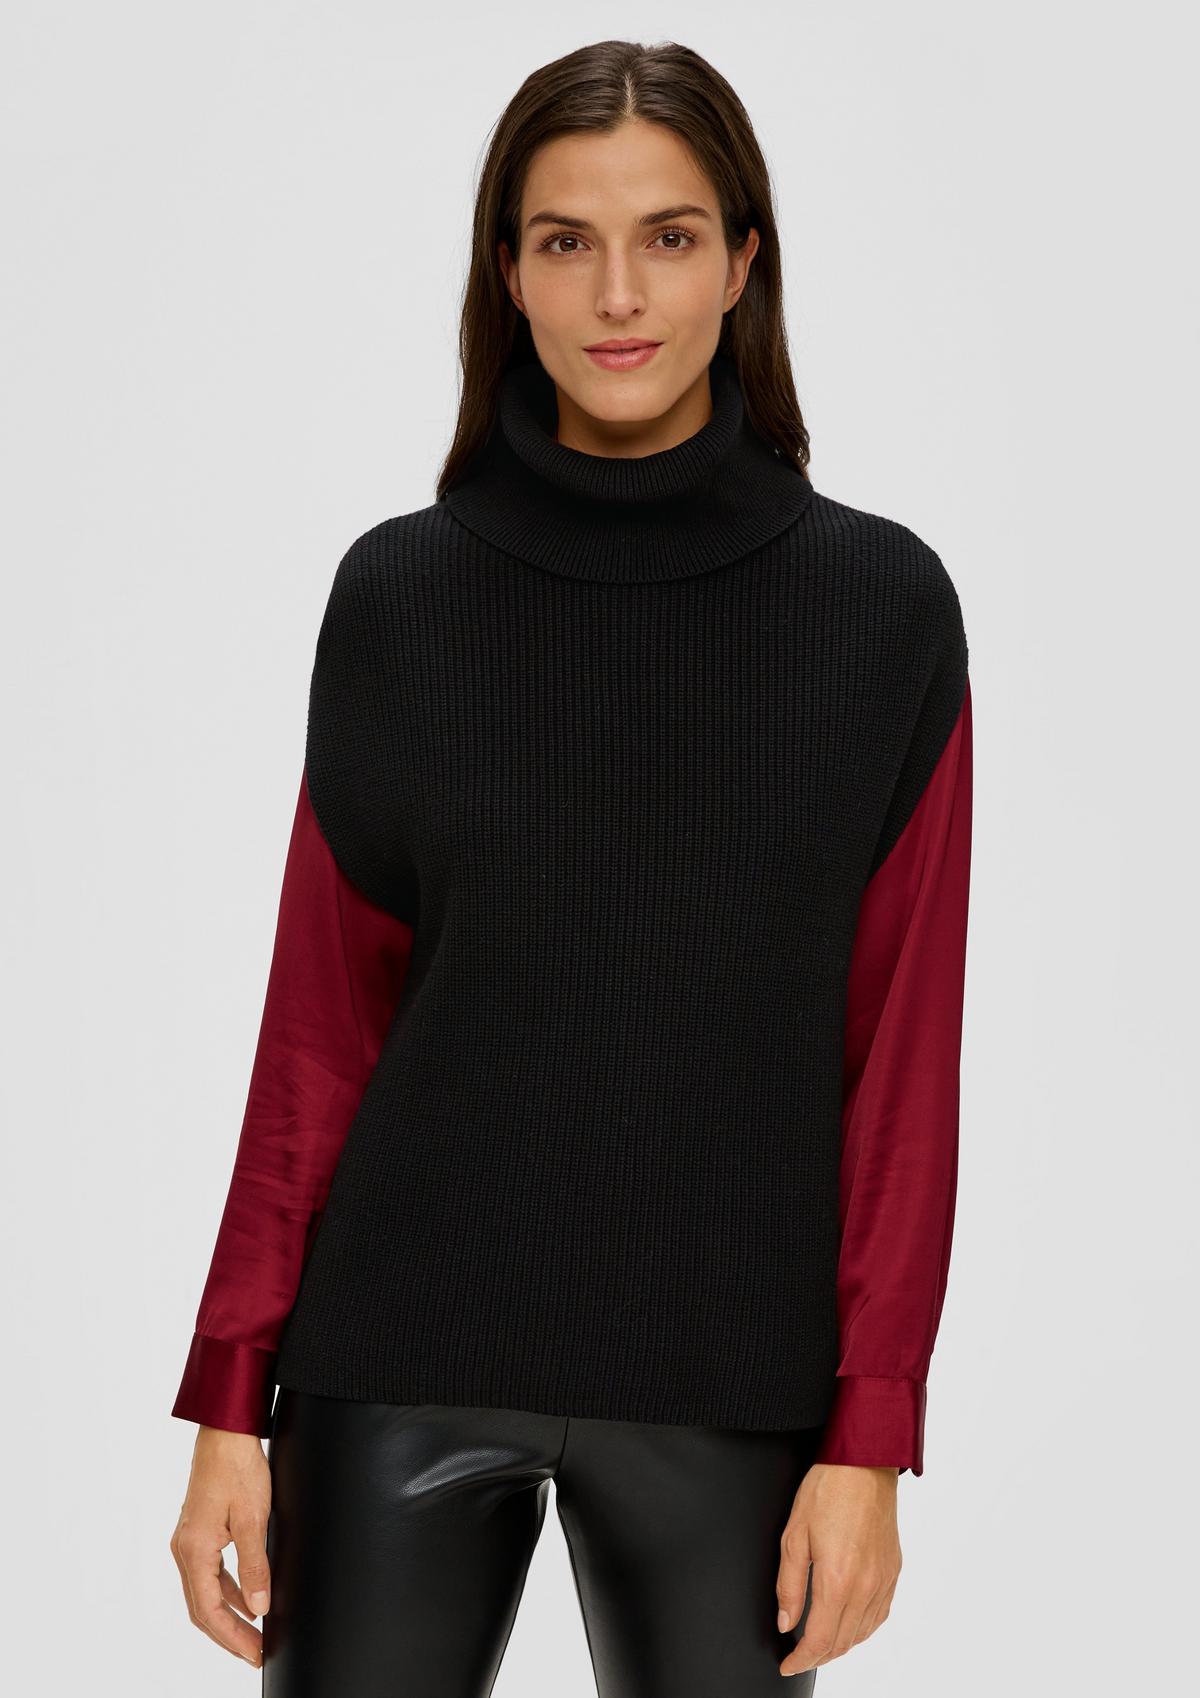 Sleeveless knitted jumper with a polo neck - graphit | s.Oliver